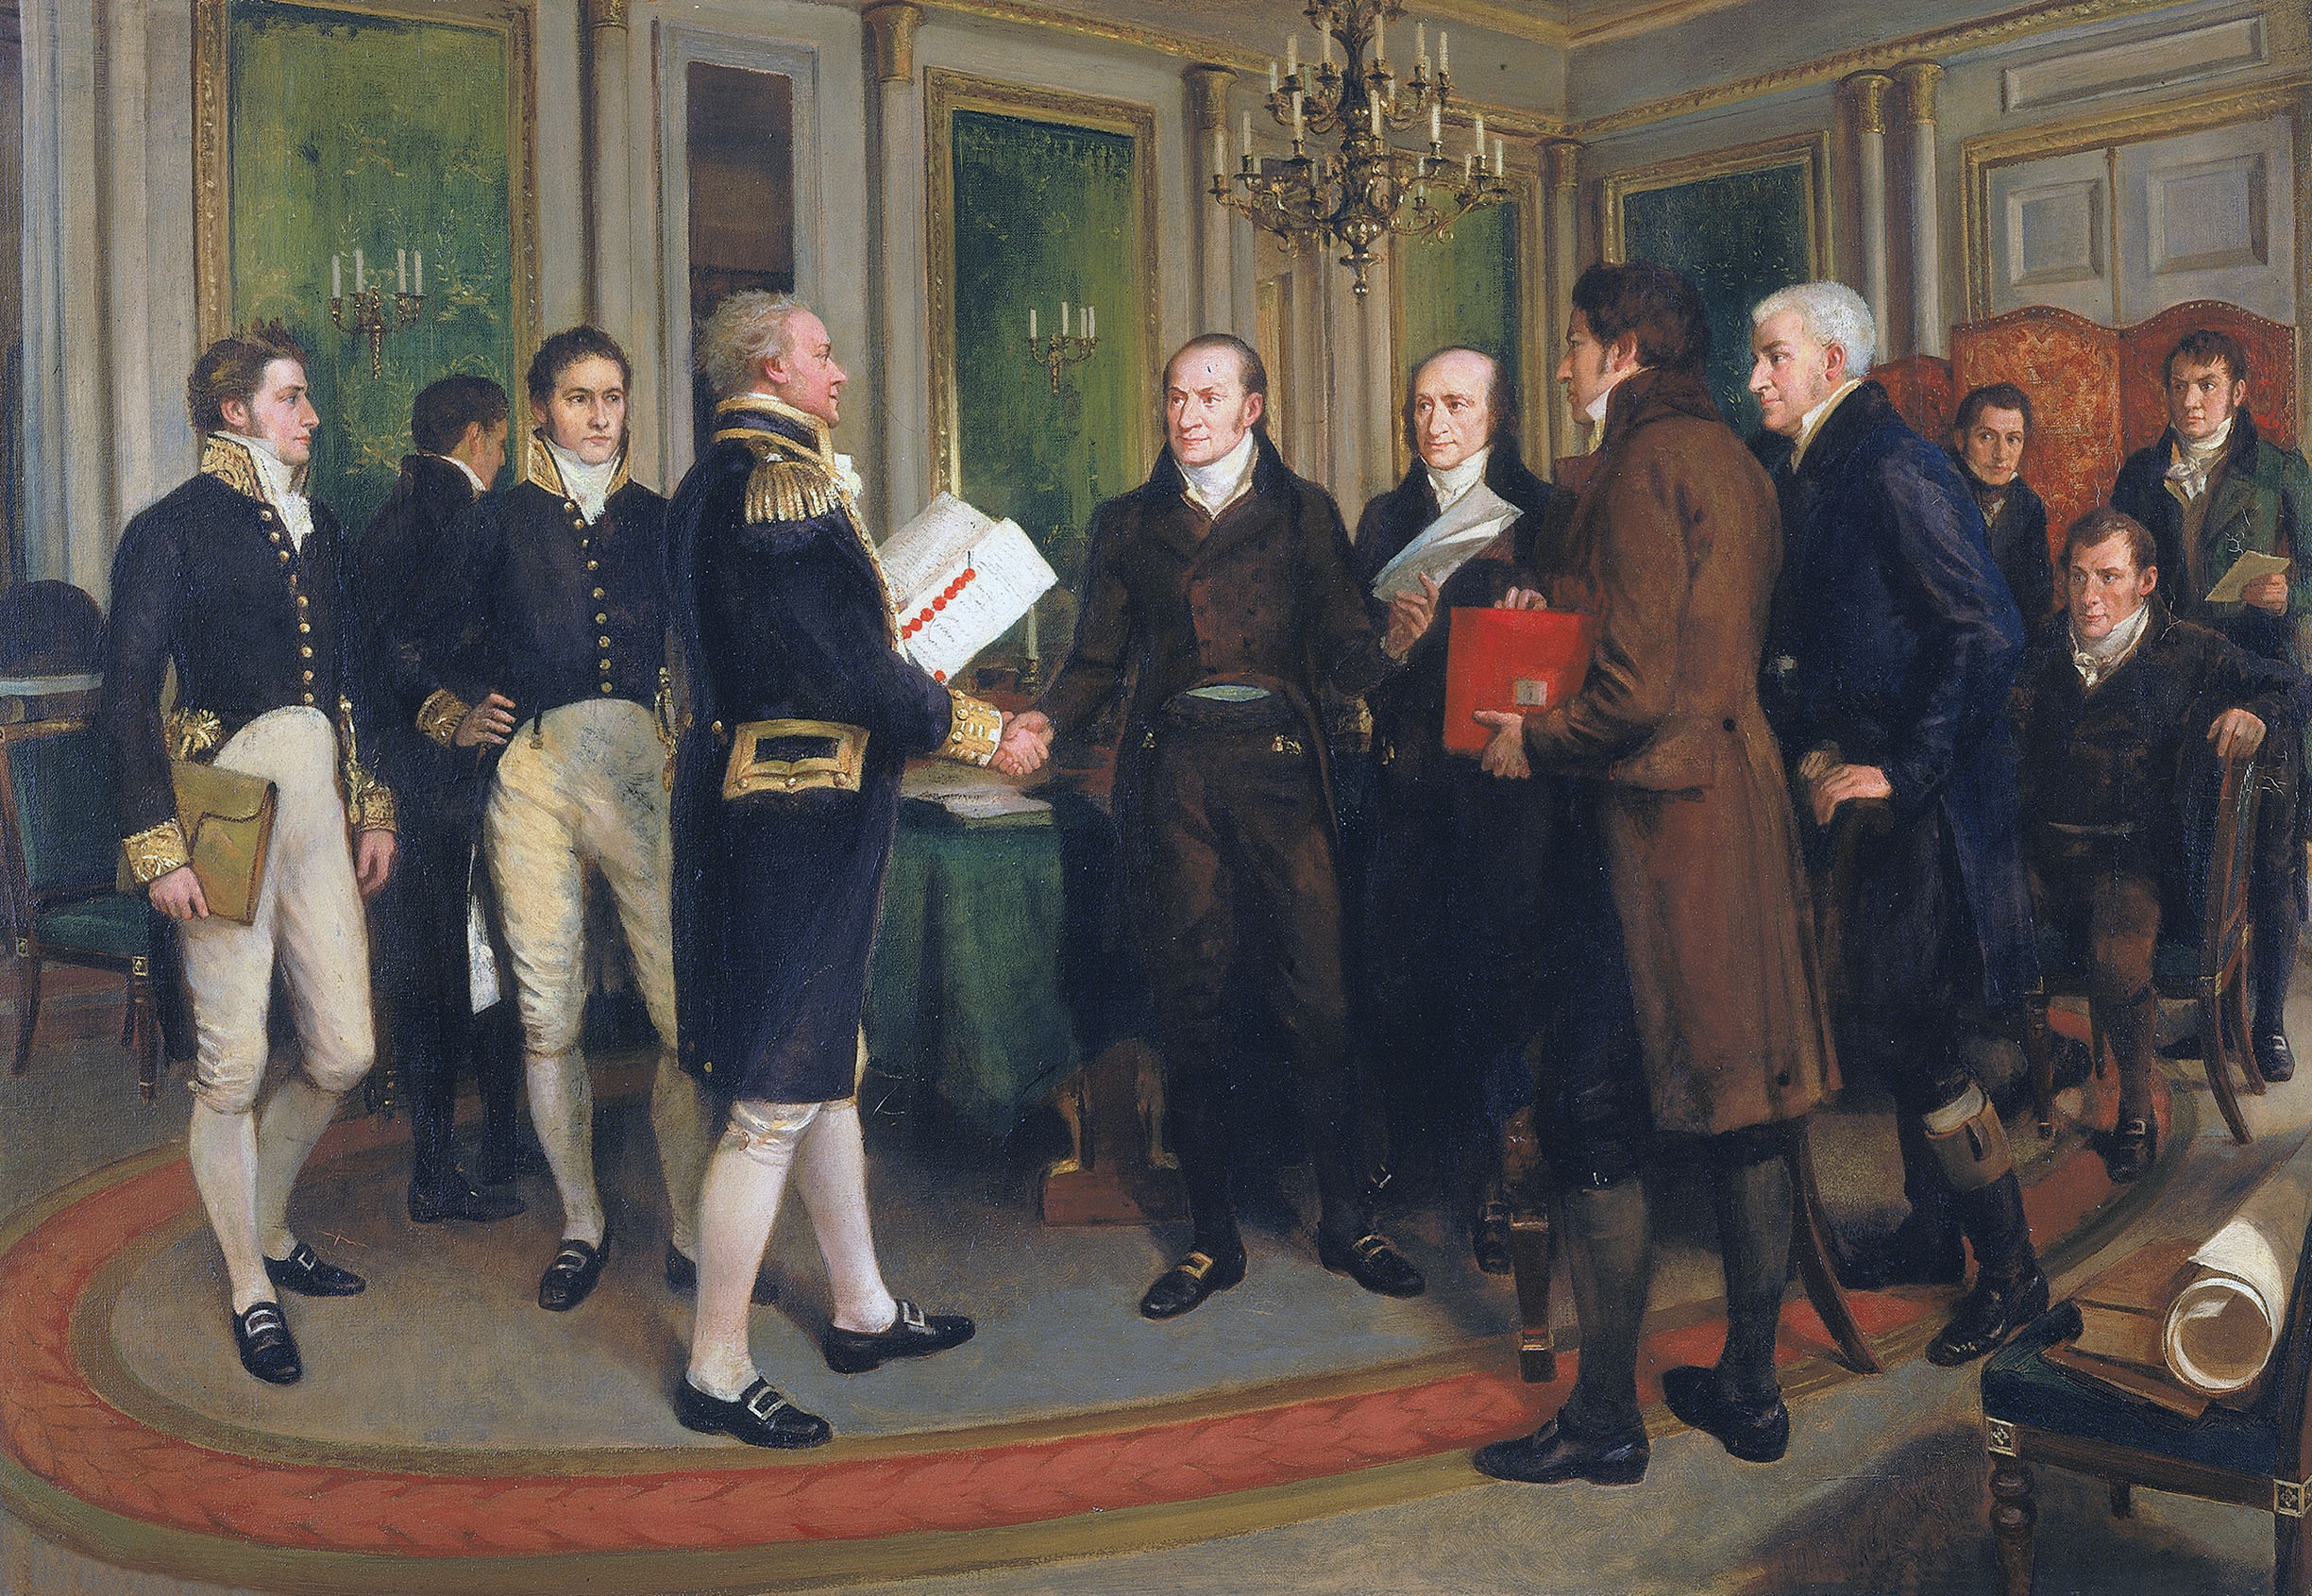 On Christmas Eve 1814 American and British representatives signed the Treaty of Ghent / American Art Museum, Smithsonian Institution